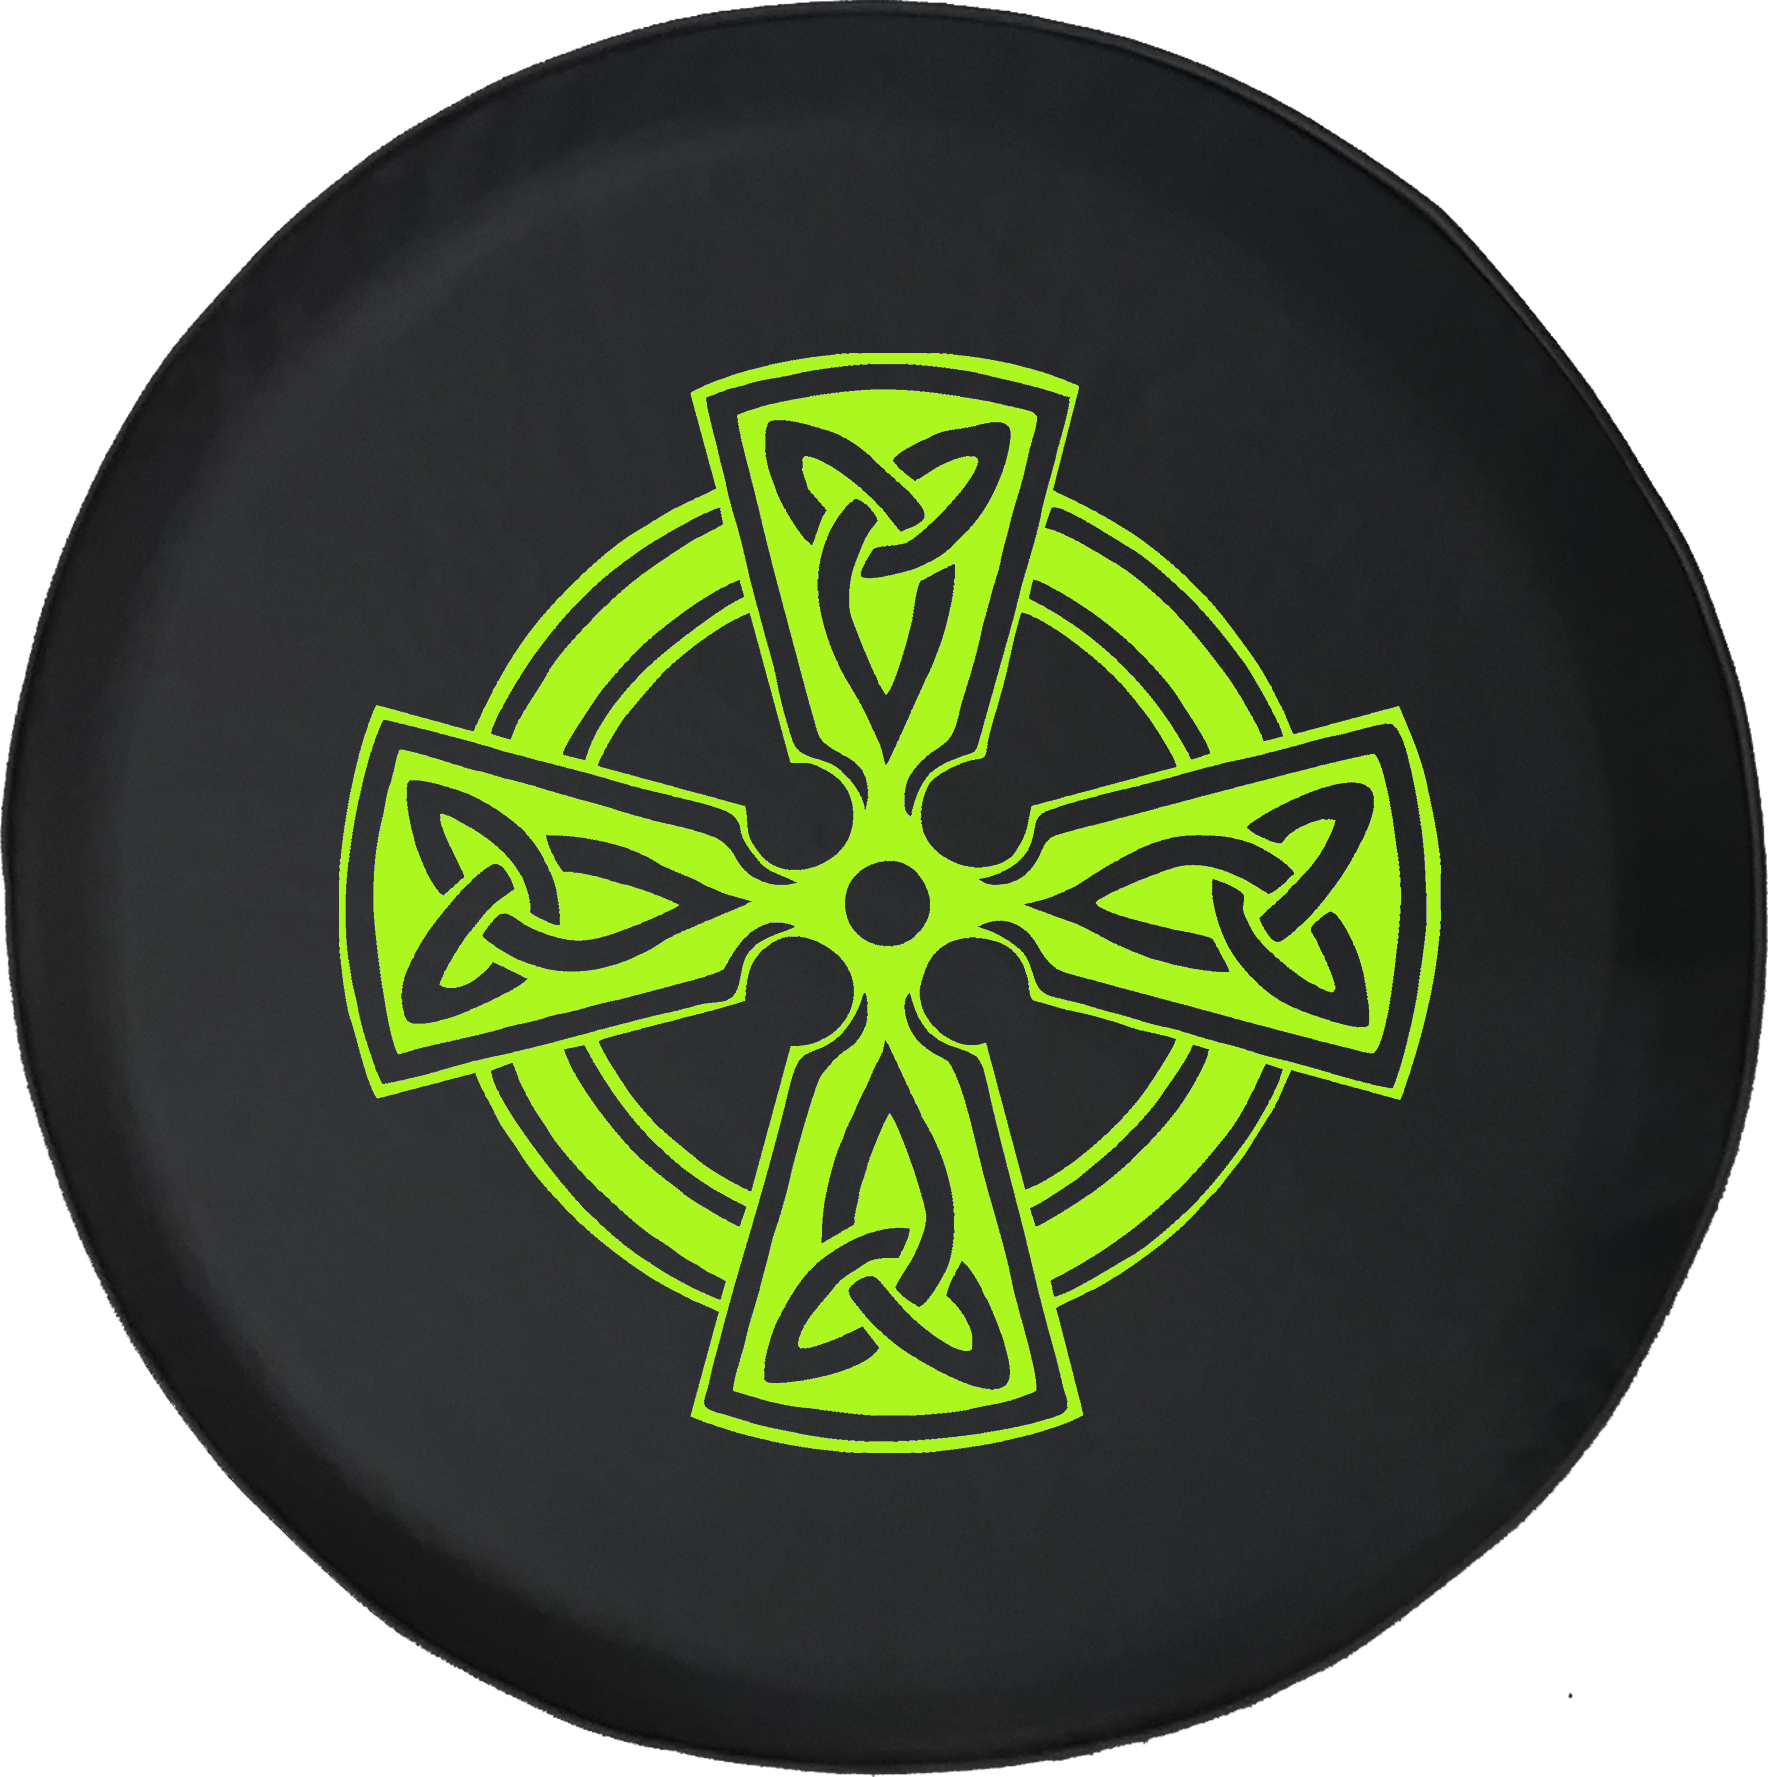 A Black And Green Circular Object With A Yellow Design